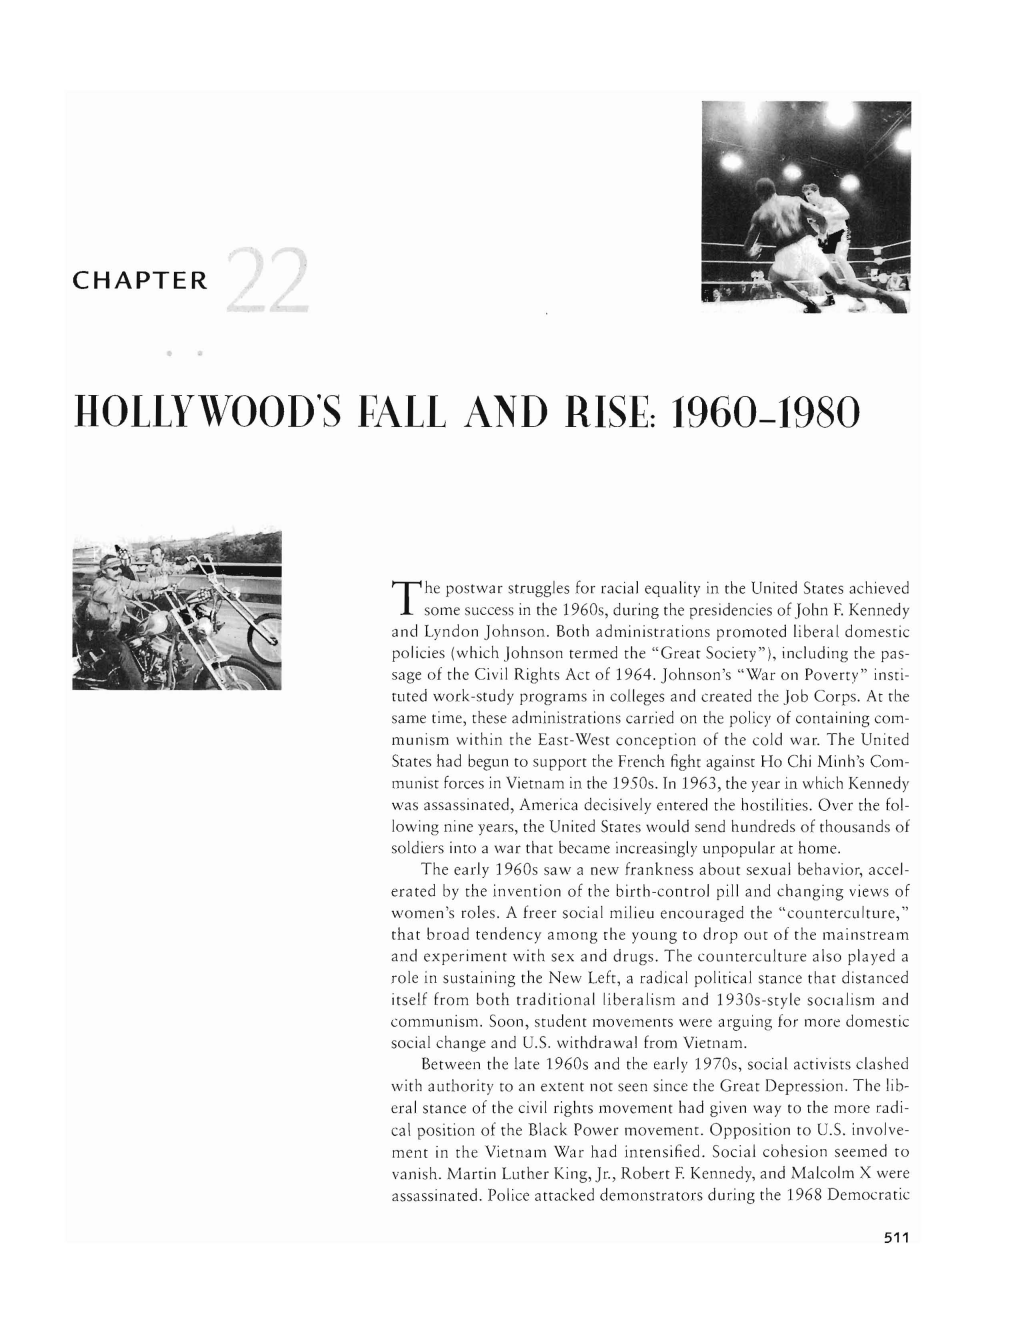 Hollywood's Fall and Ris£: 1960-1980